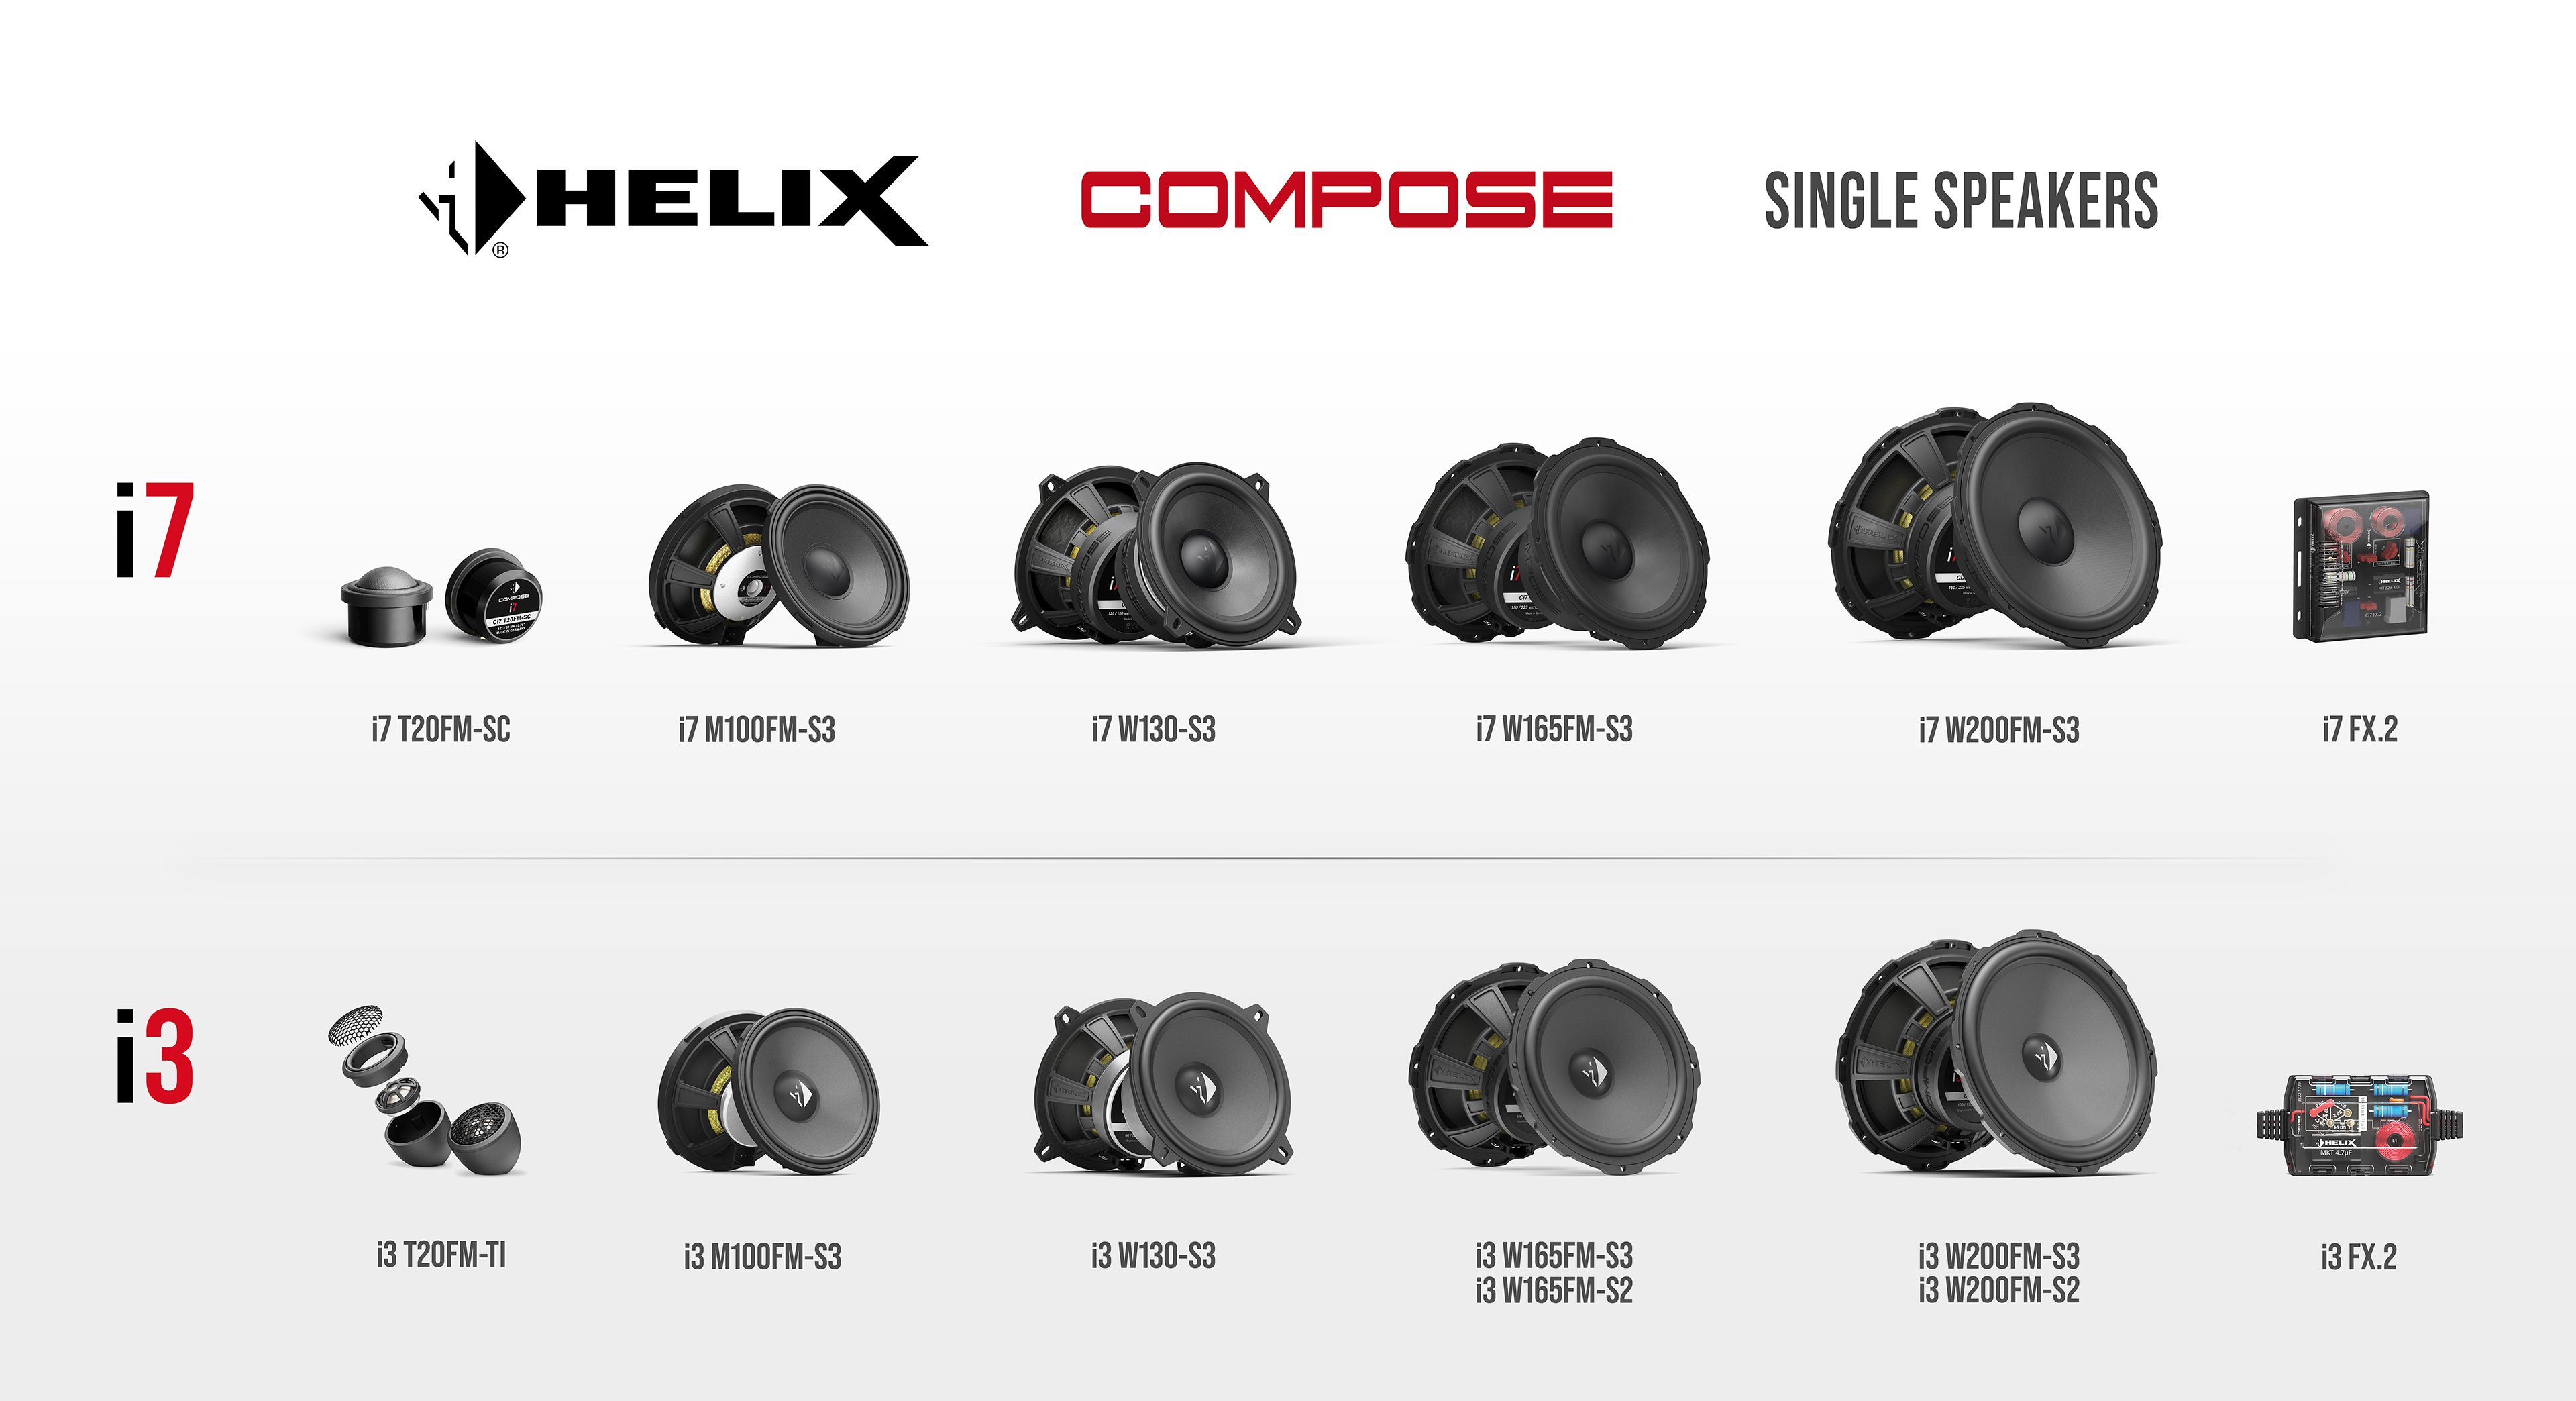 HELIX COMPOSE SINGLE SPEAKERS Overview